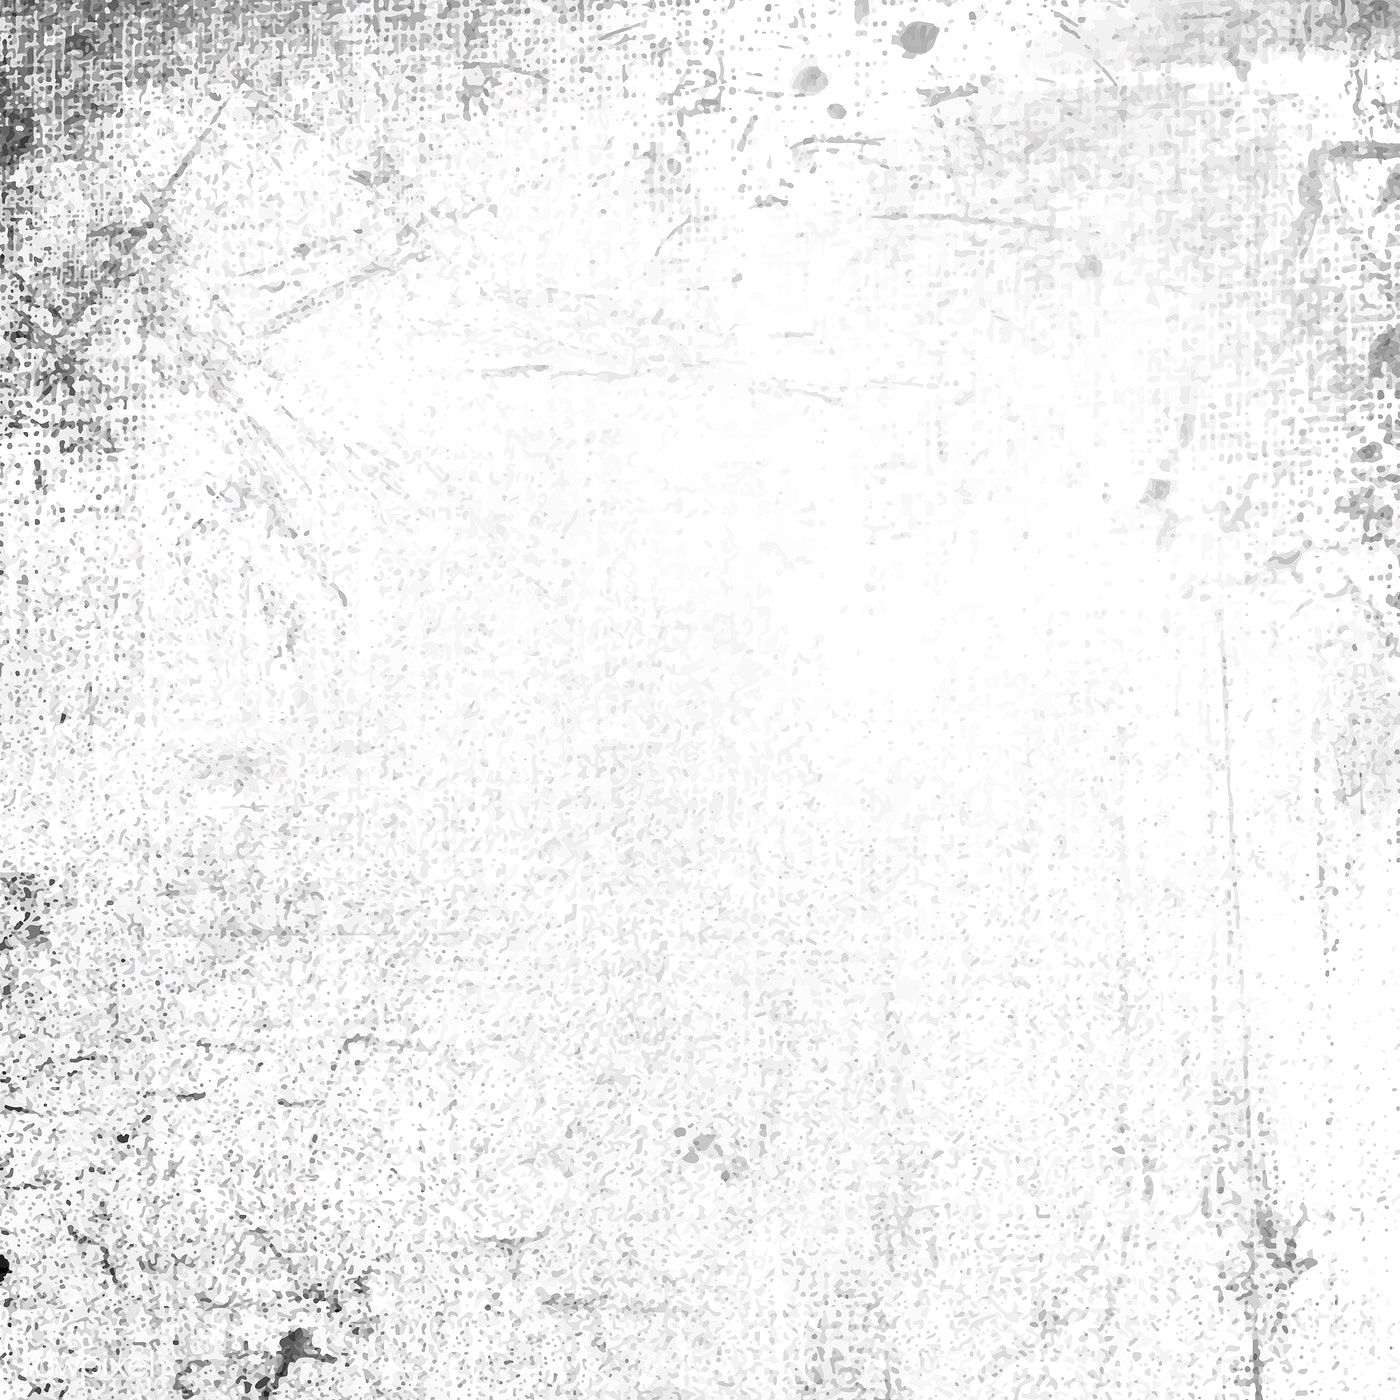 Grunge black and white distressed textured background free image